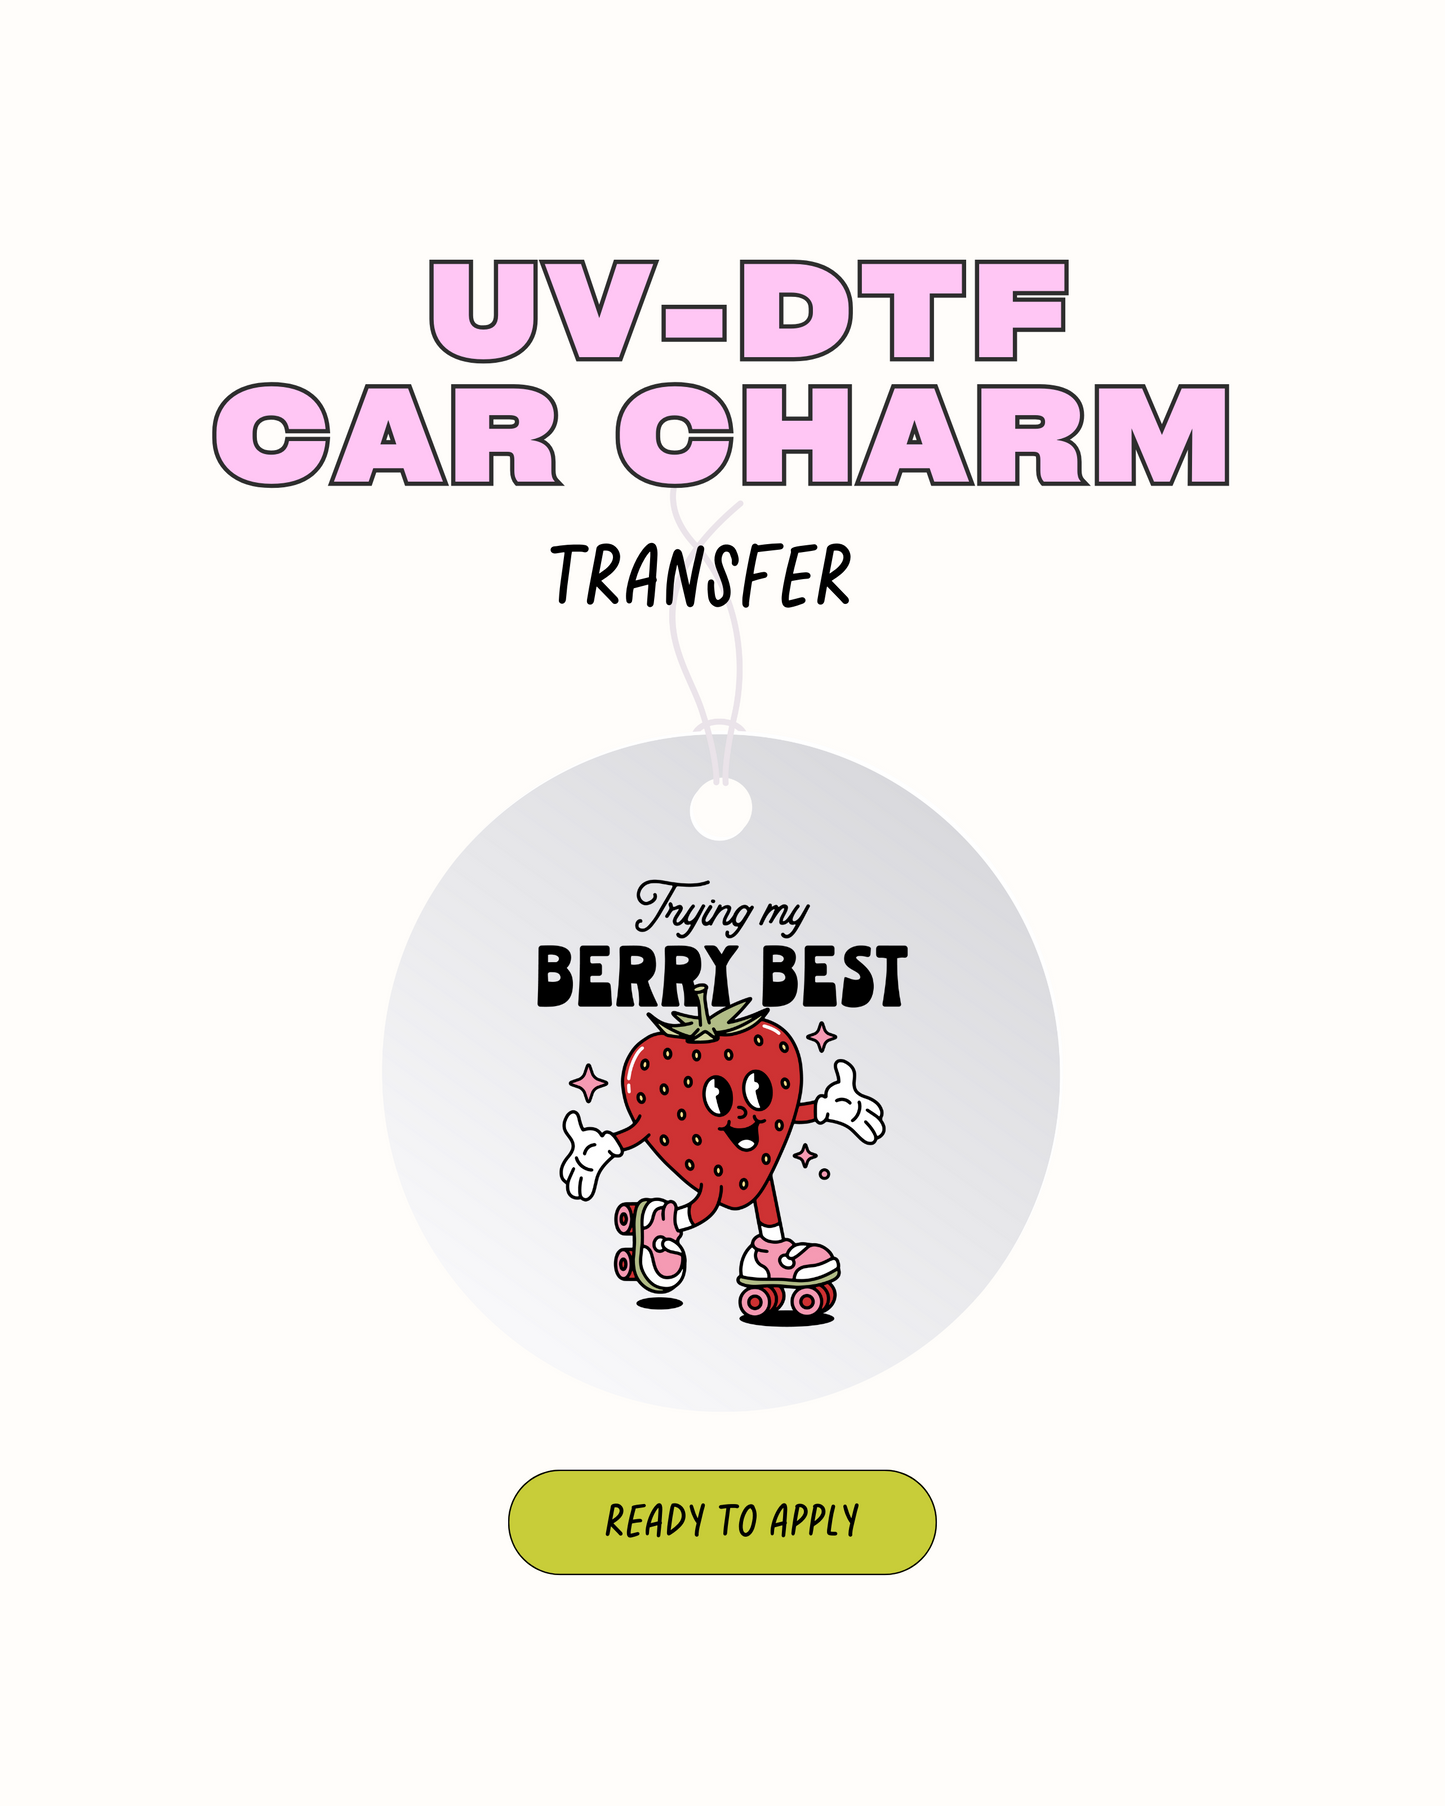 Trying my Very Best - Car Charm Decal